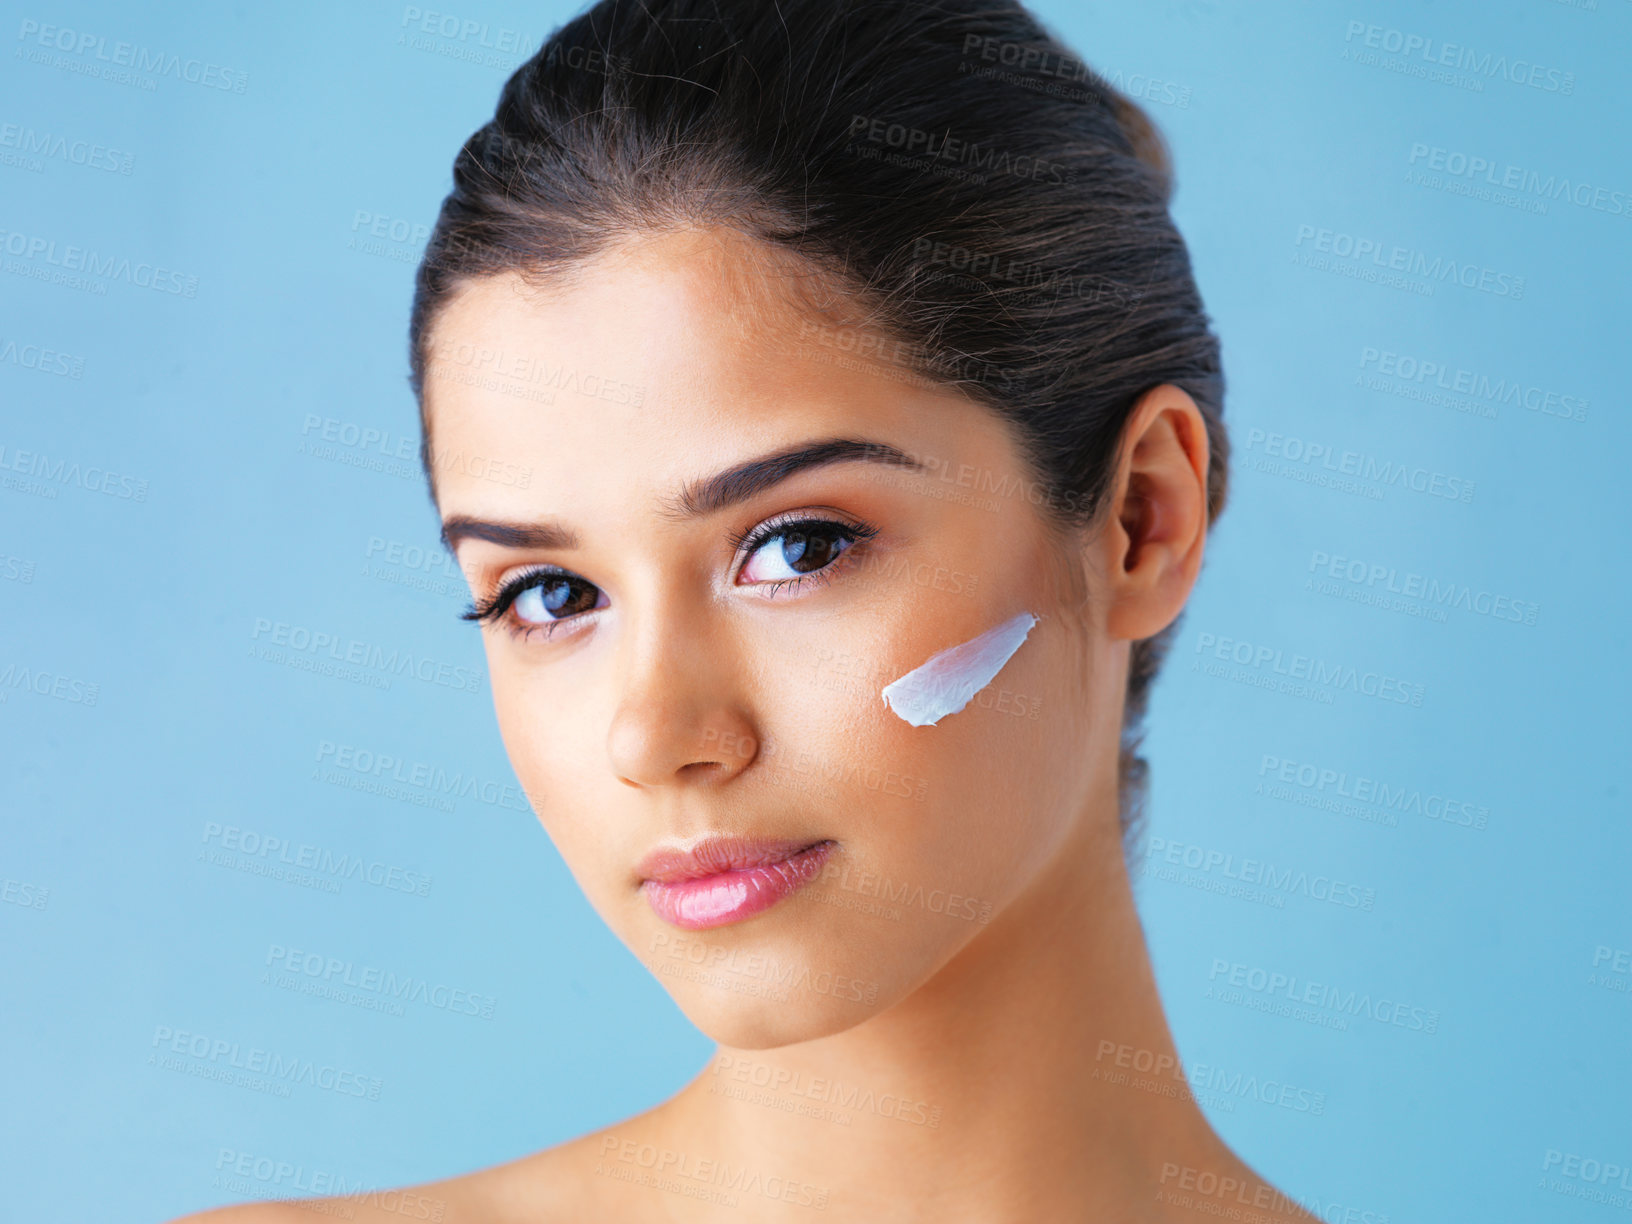 Buy stock photo Studio portrait of a beautiful young woman with lotion on her face against a blue background